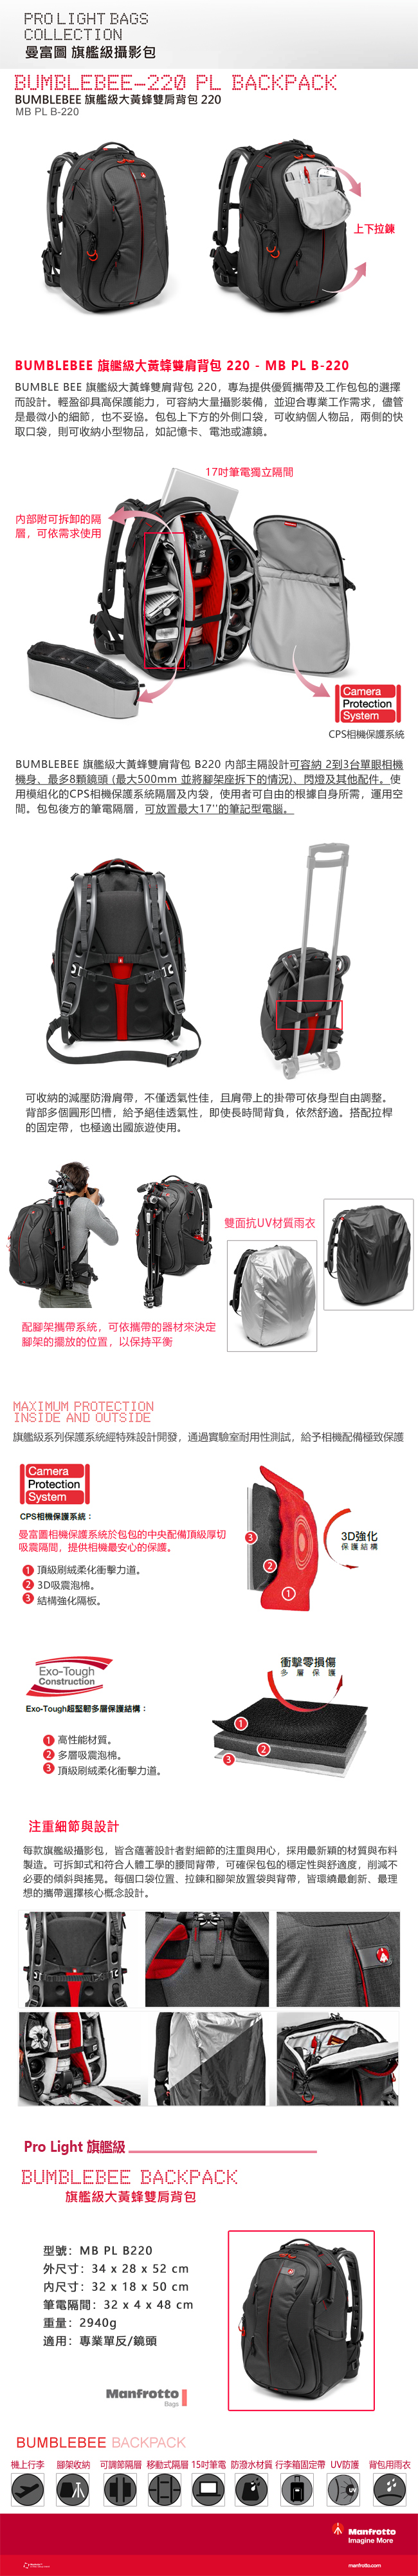 Manfrotto Bumblebee-220 PL Backpack旗艦級大黃蜂雙肩背包